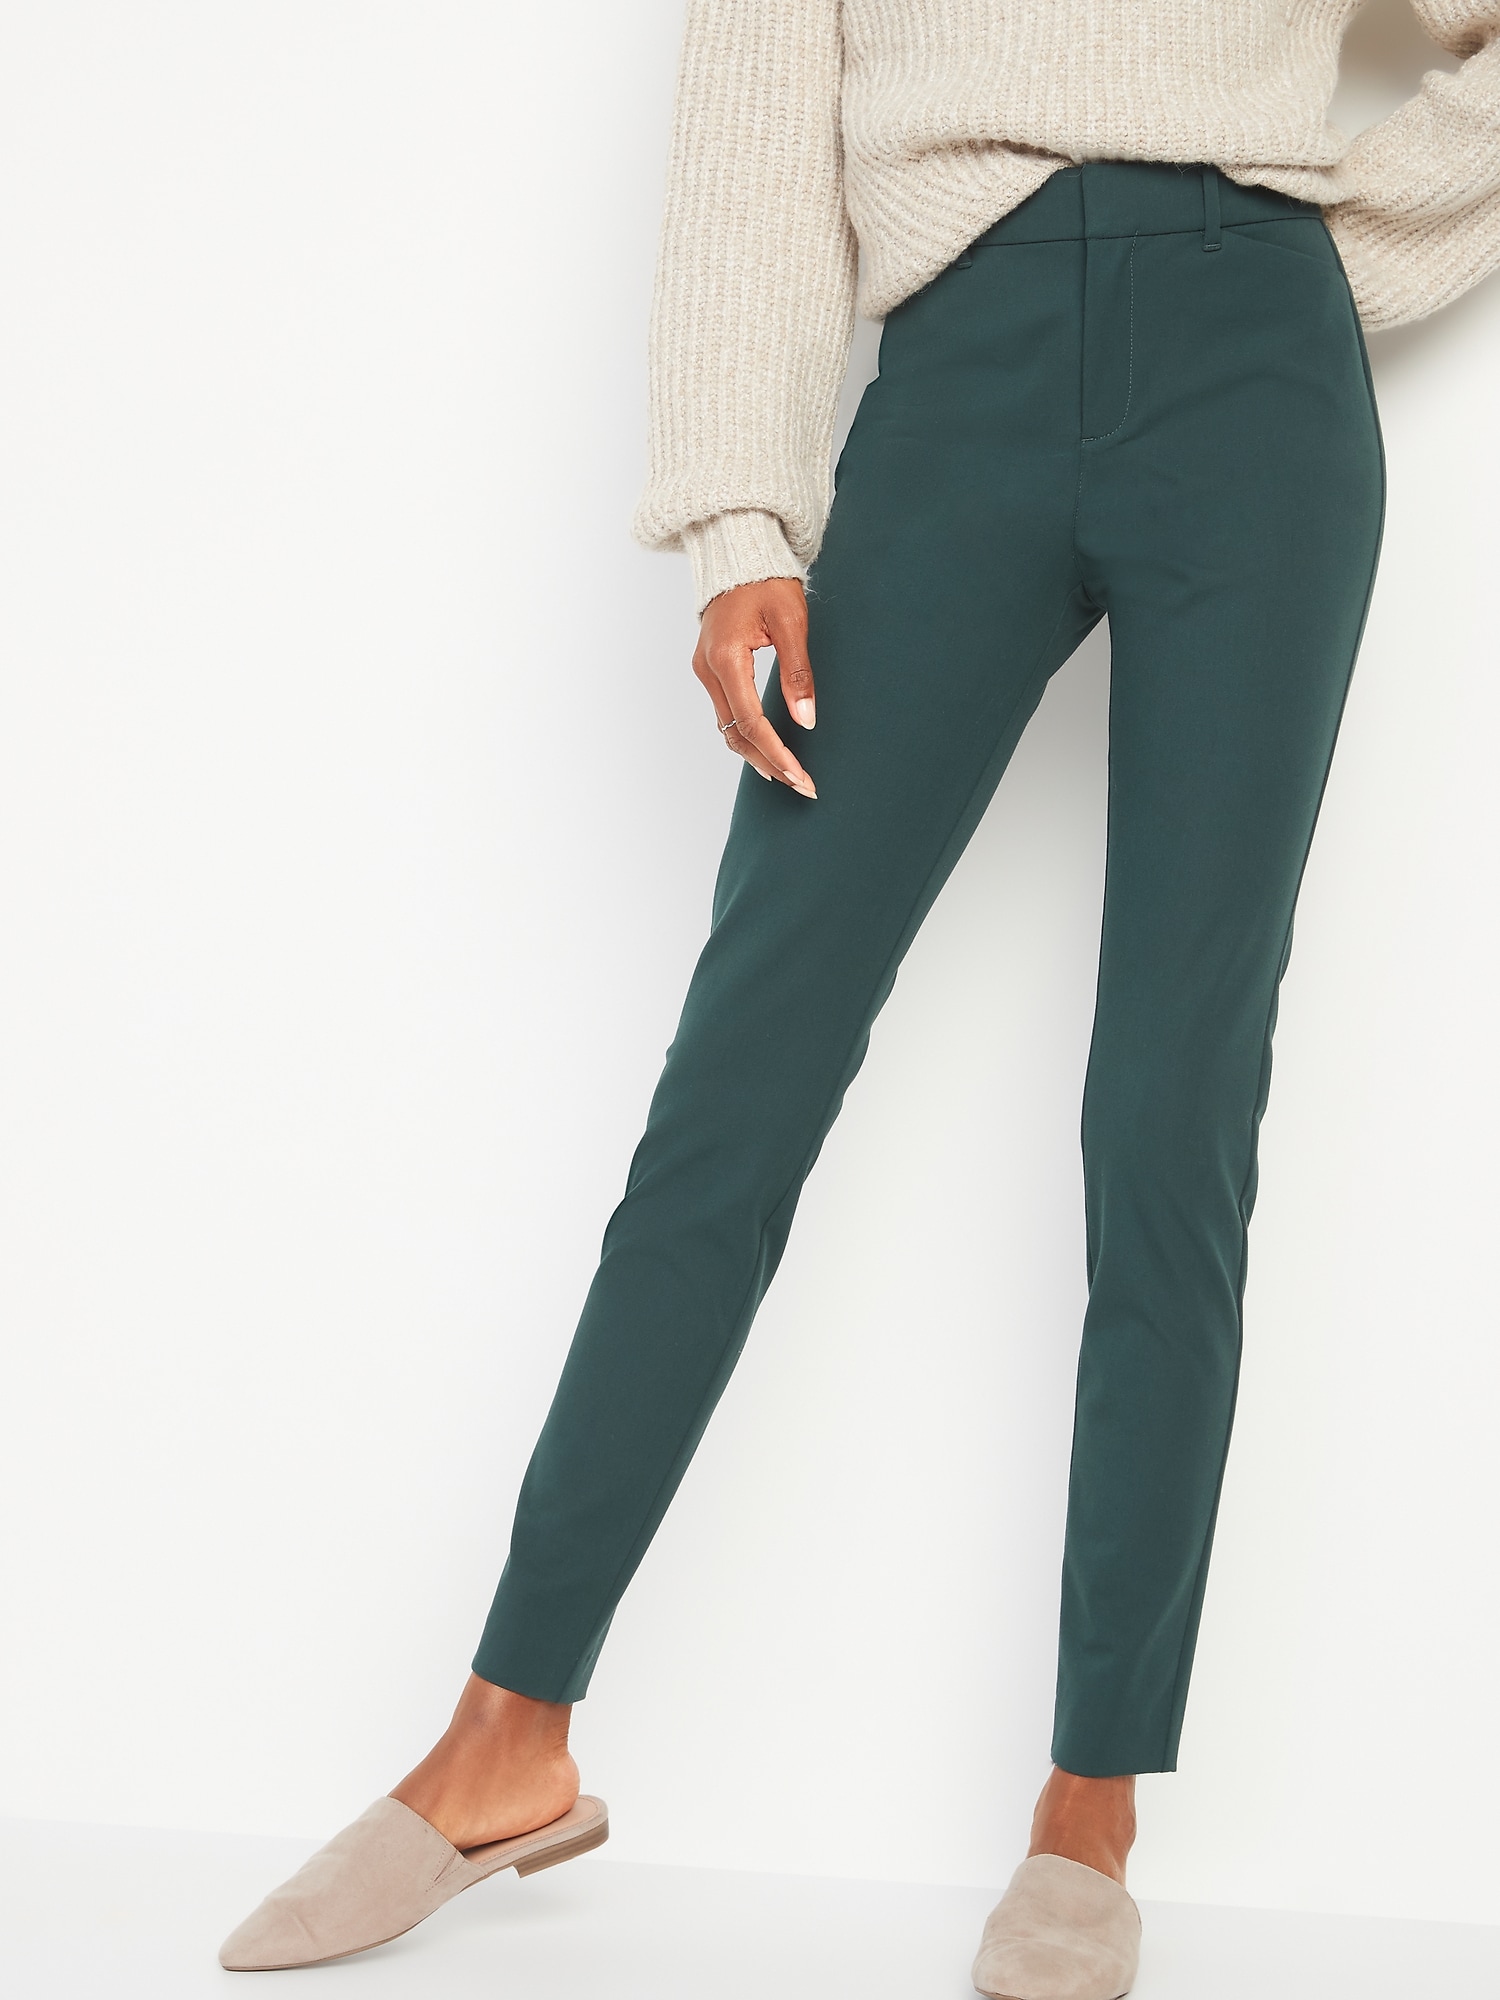 High-waisted Pixie Full-Length Pants for Women from Old Navy